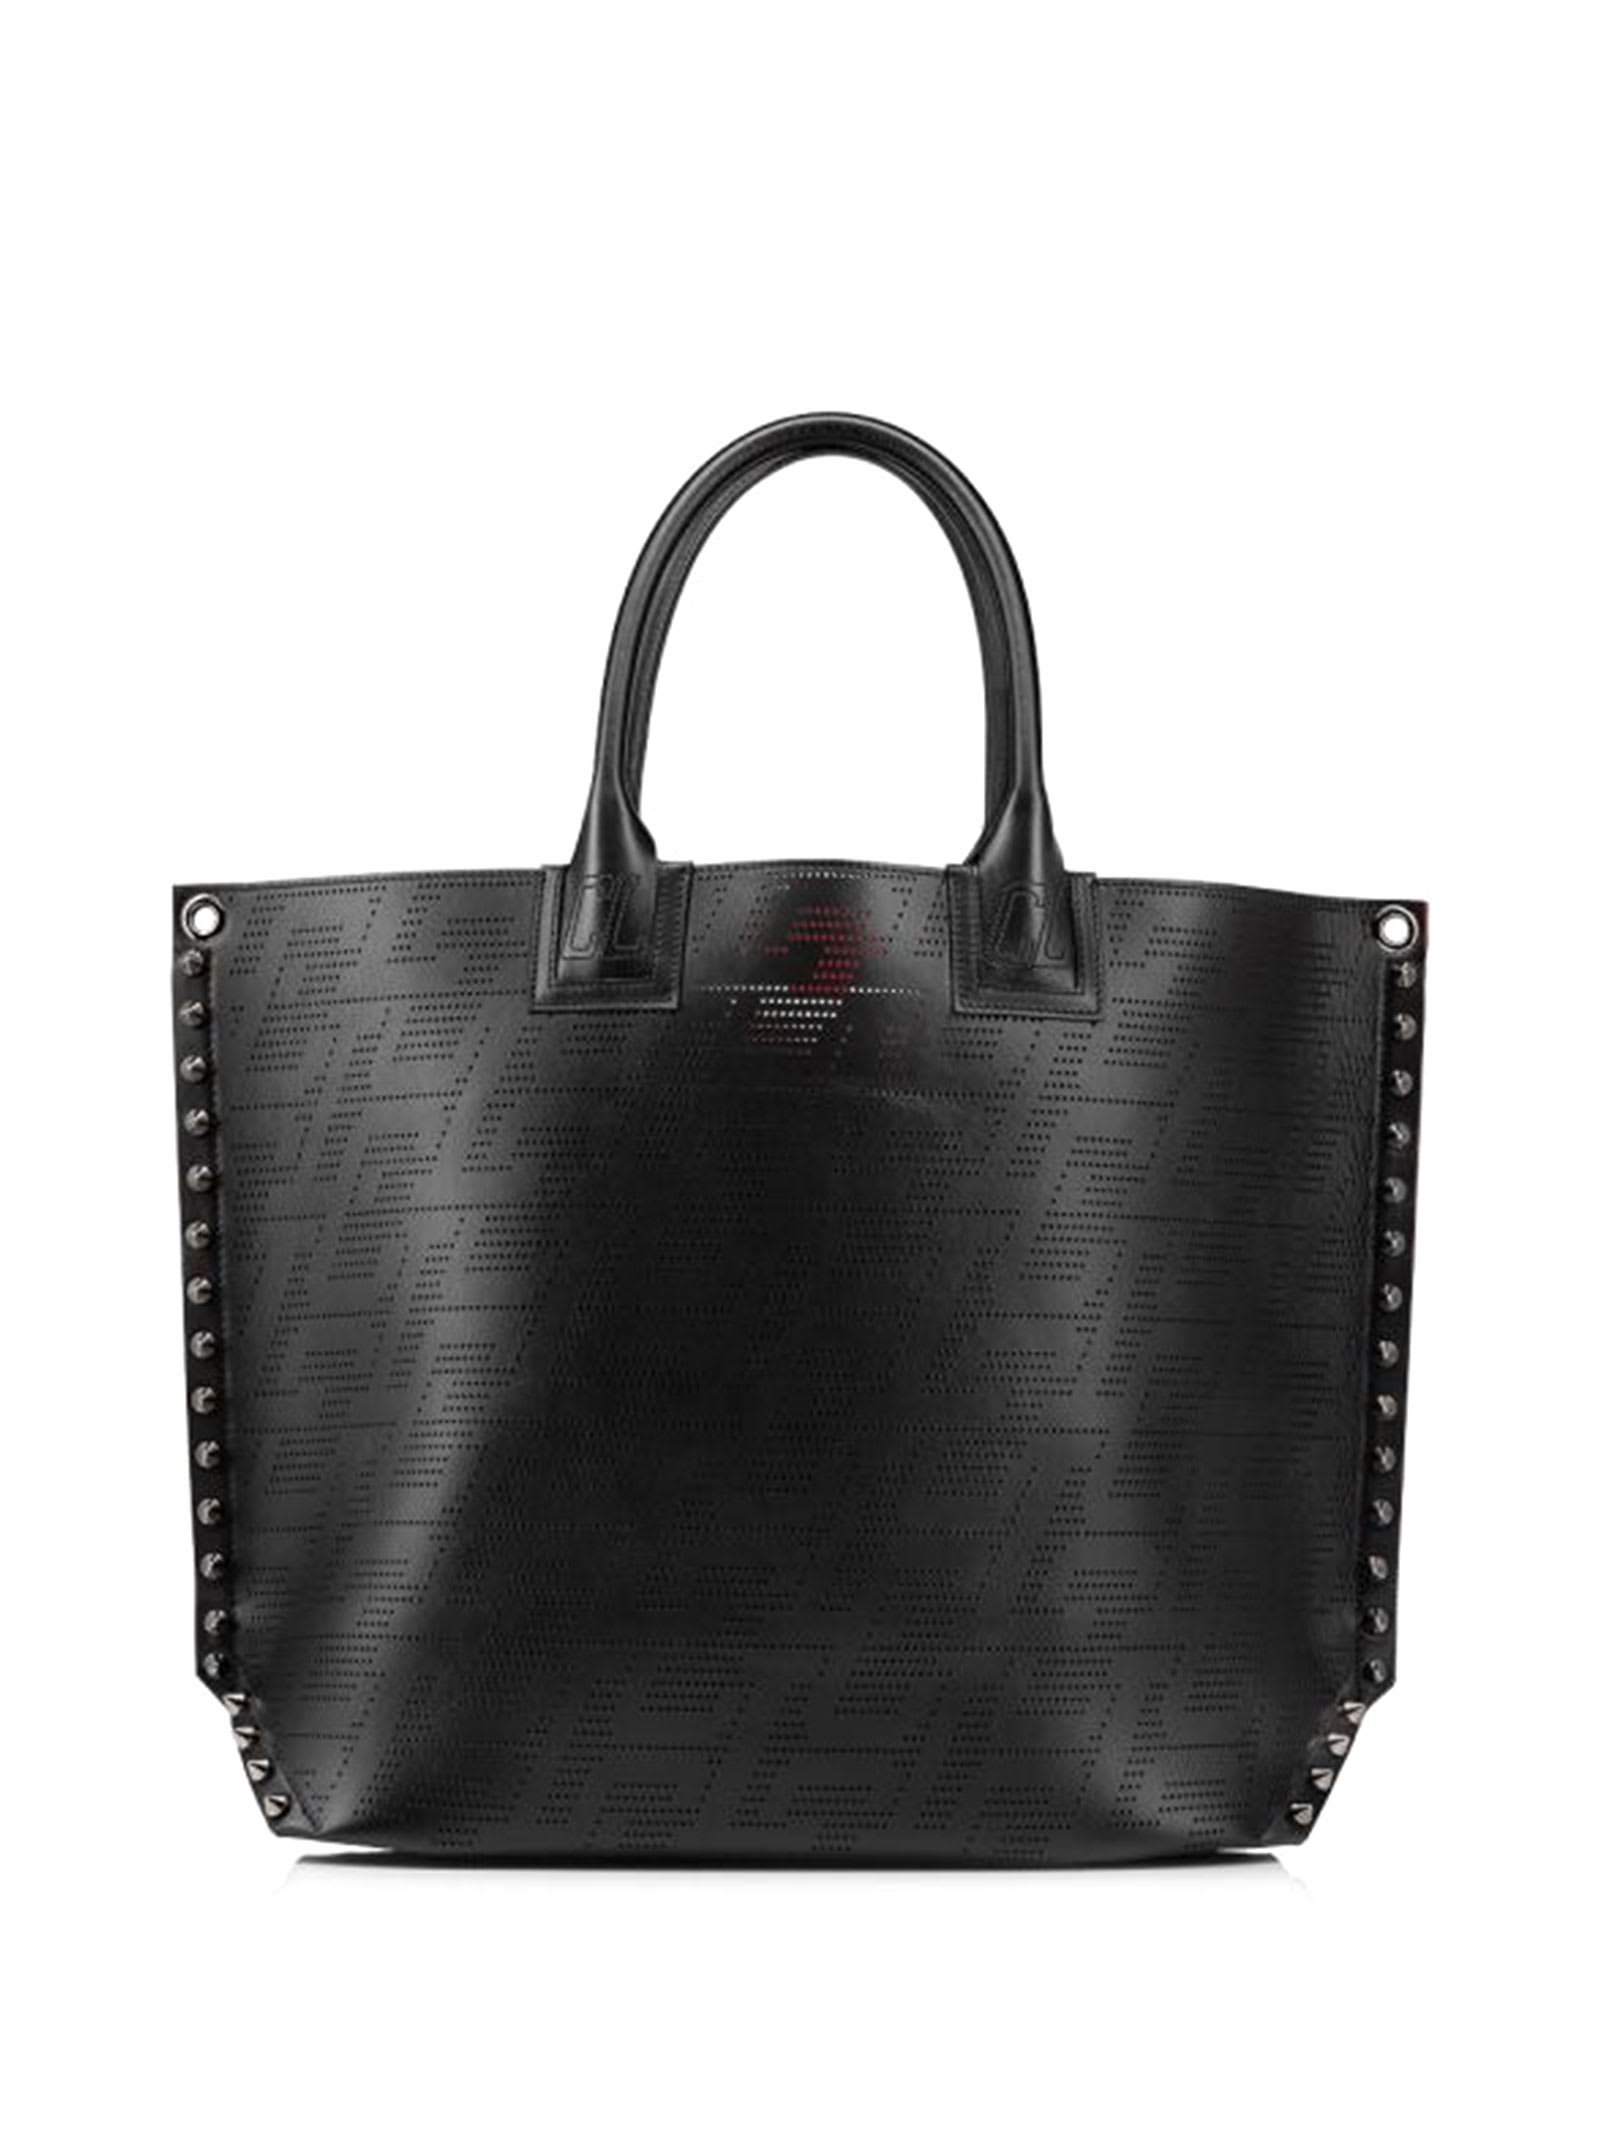 Christian Louboutin Perforated Calf Leather Tote Bag